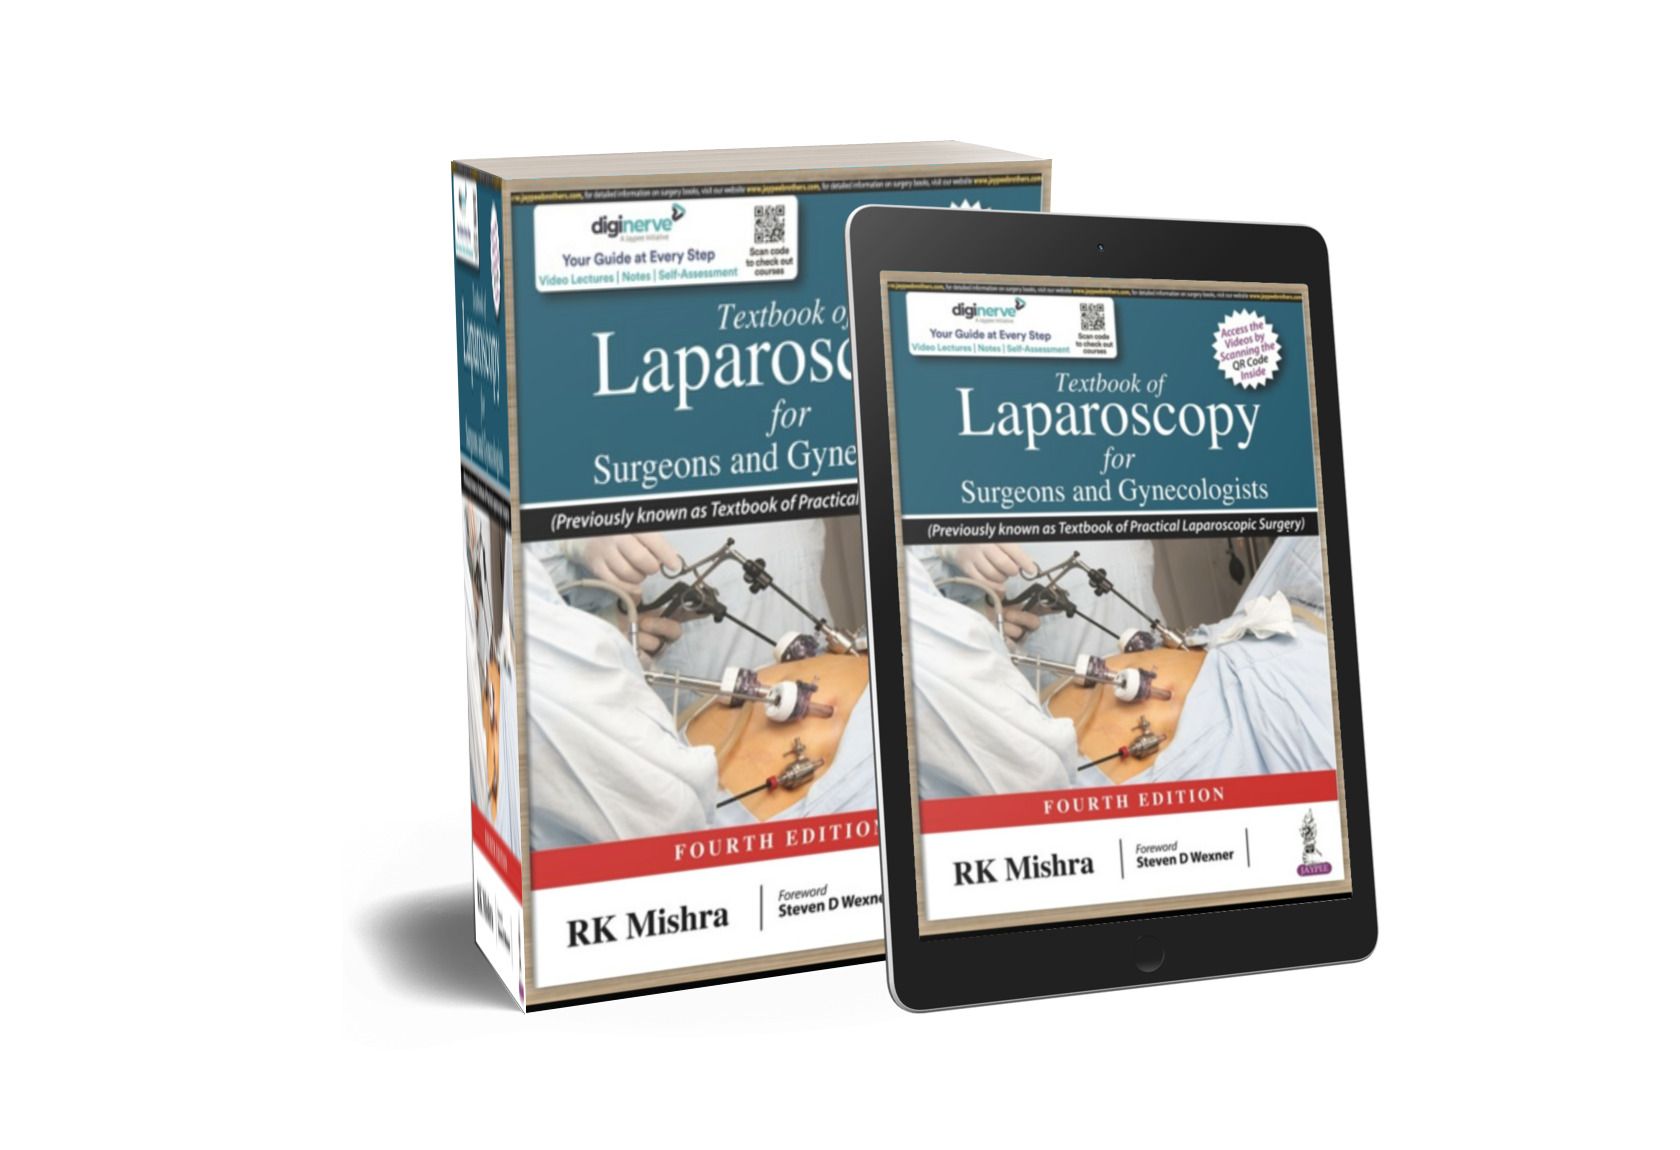 Textbook of Laparoscopy for Surgeons and Gynecologists